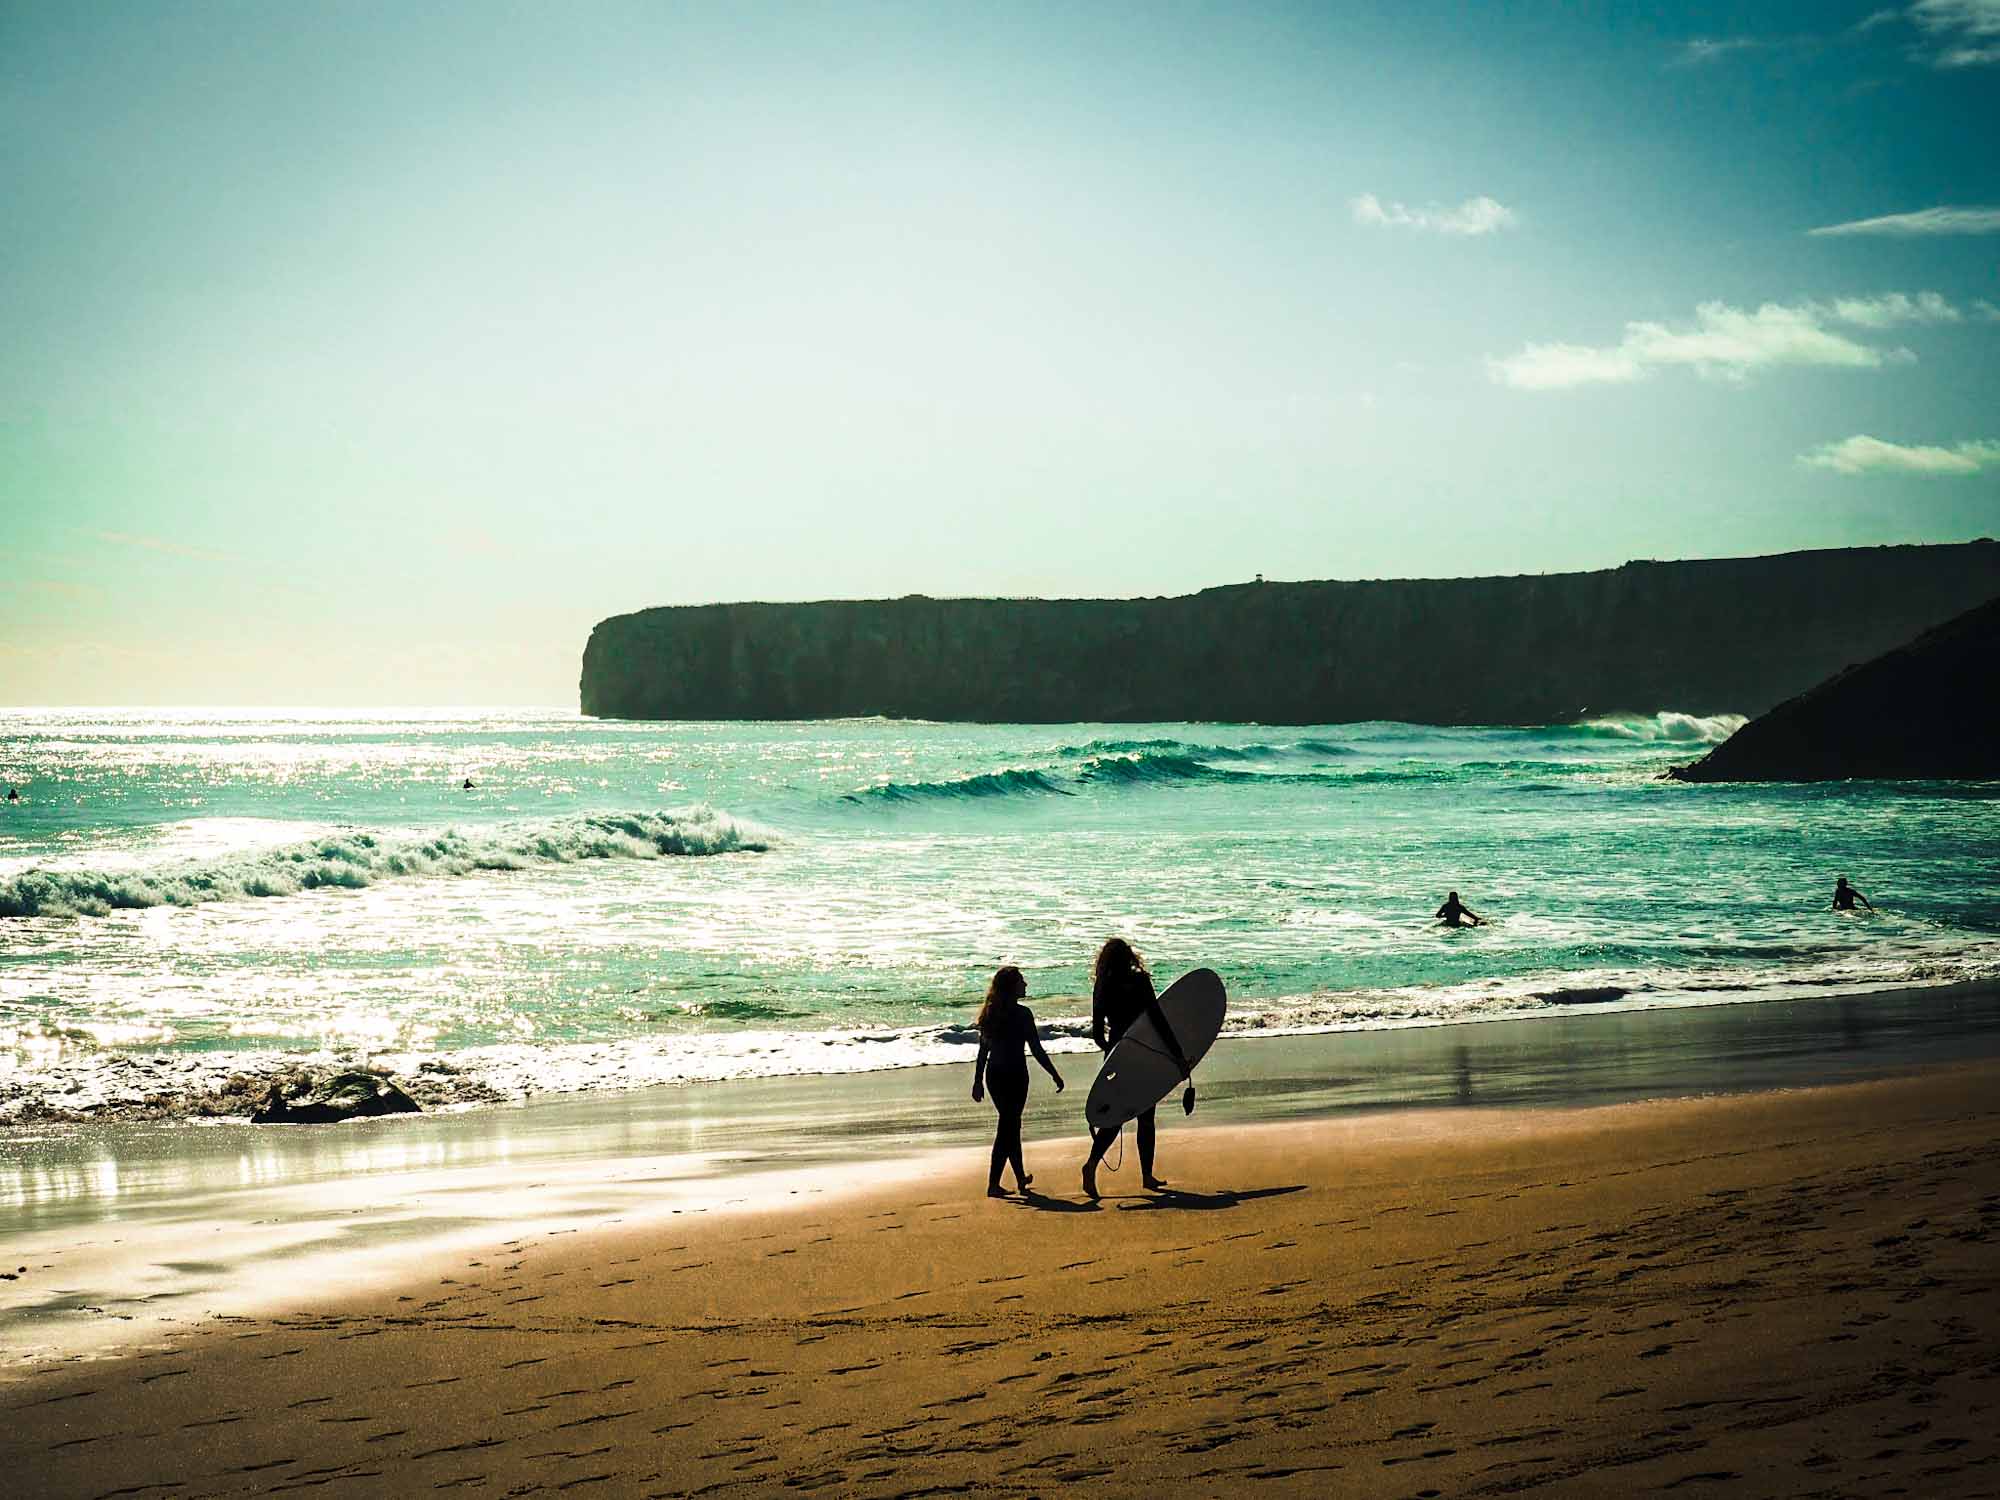 Surfers walking along a sandy beach with waves in the sea behind